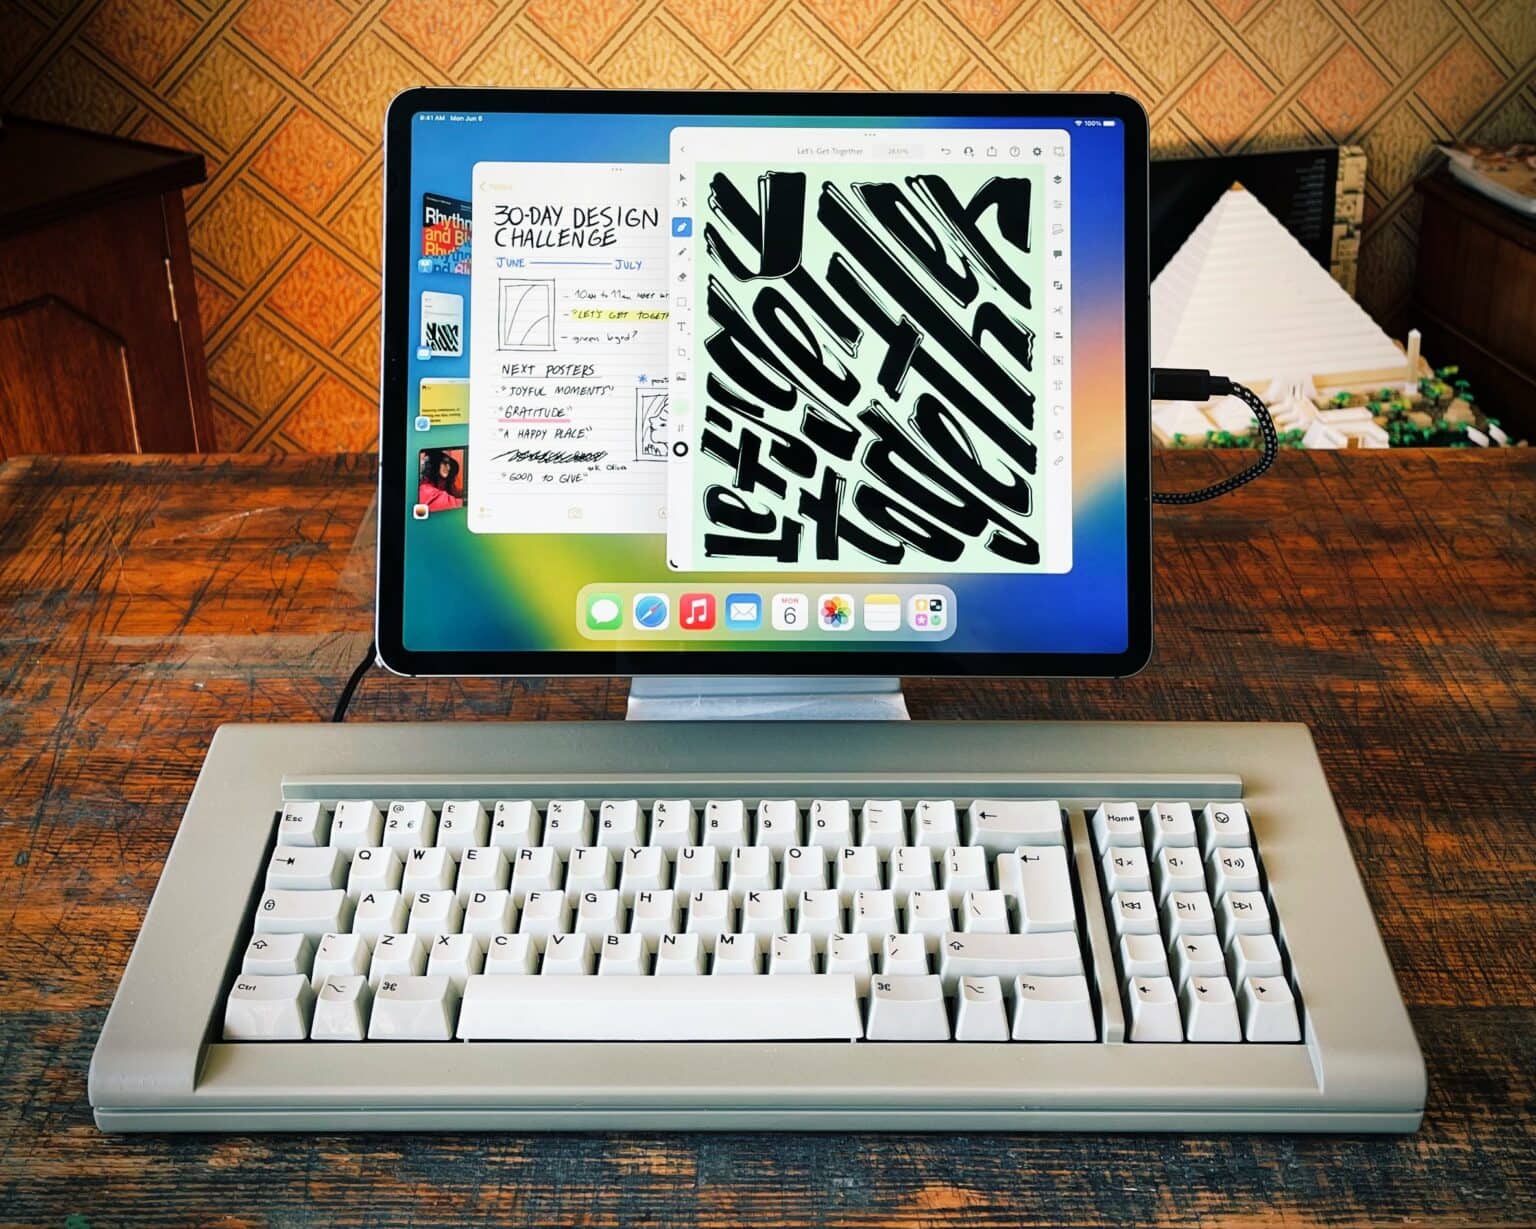 The biggest iPad doesn't look so big next to that mechanical keyboard.